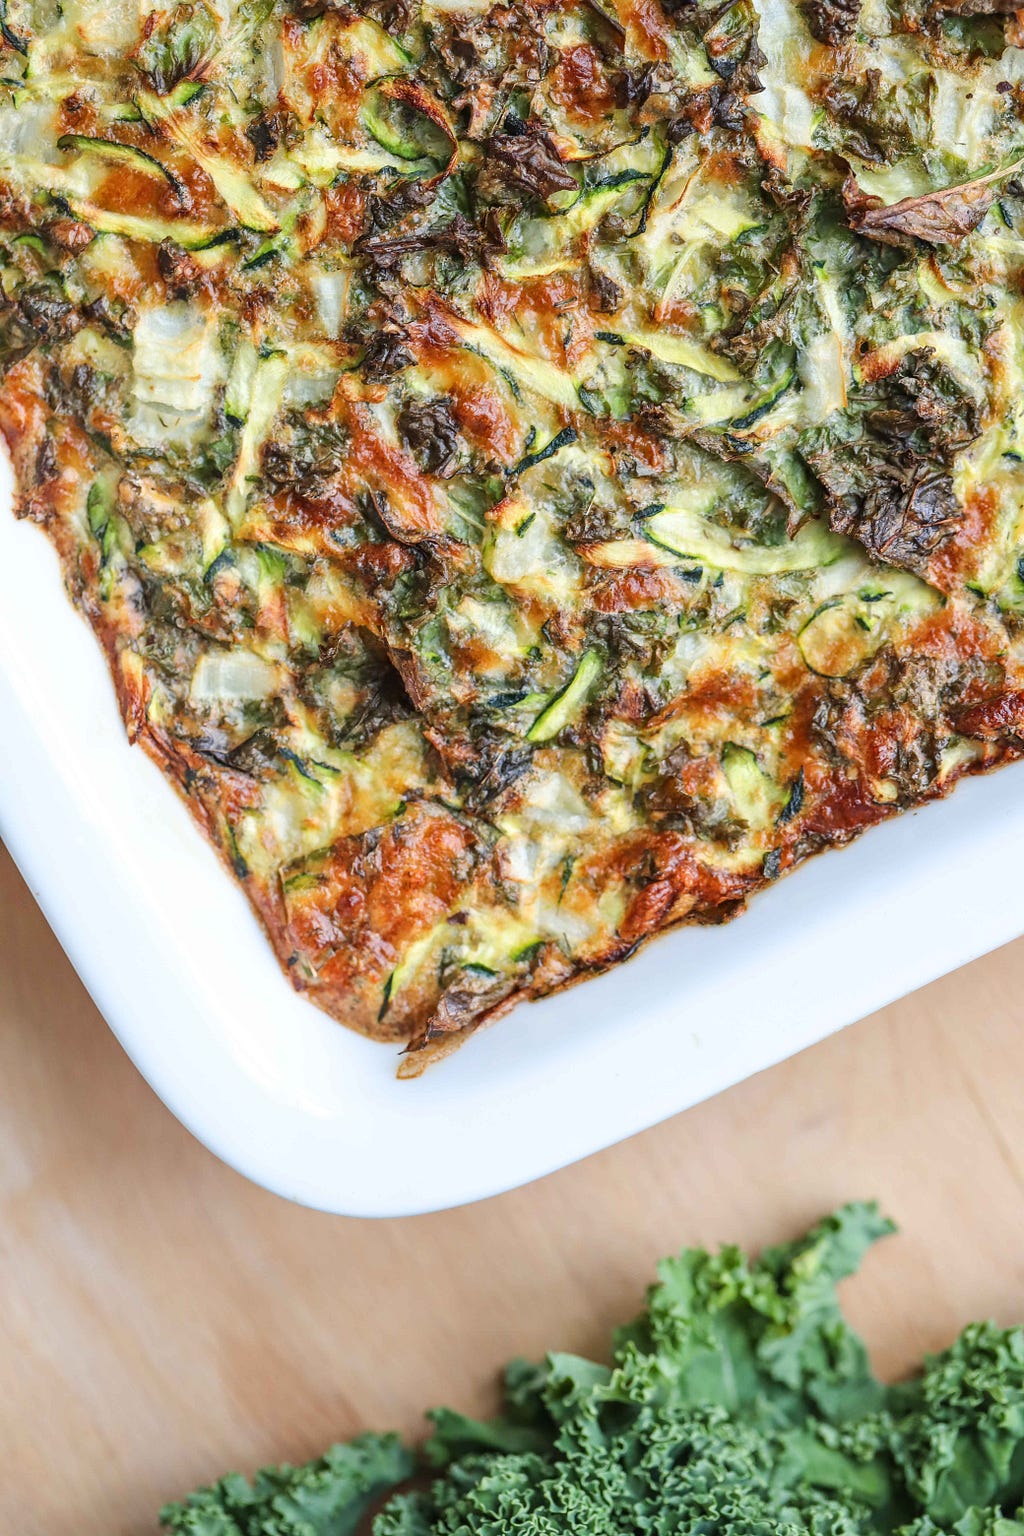 Zucchini and kale breakfast bake in a white baking dish on top of a wooden cutting board